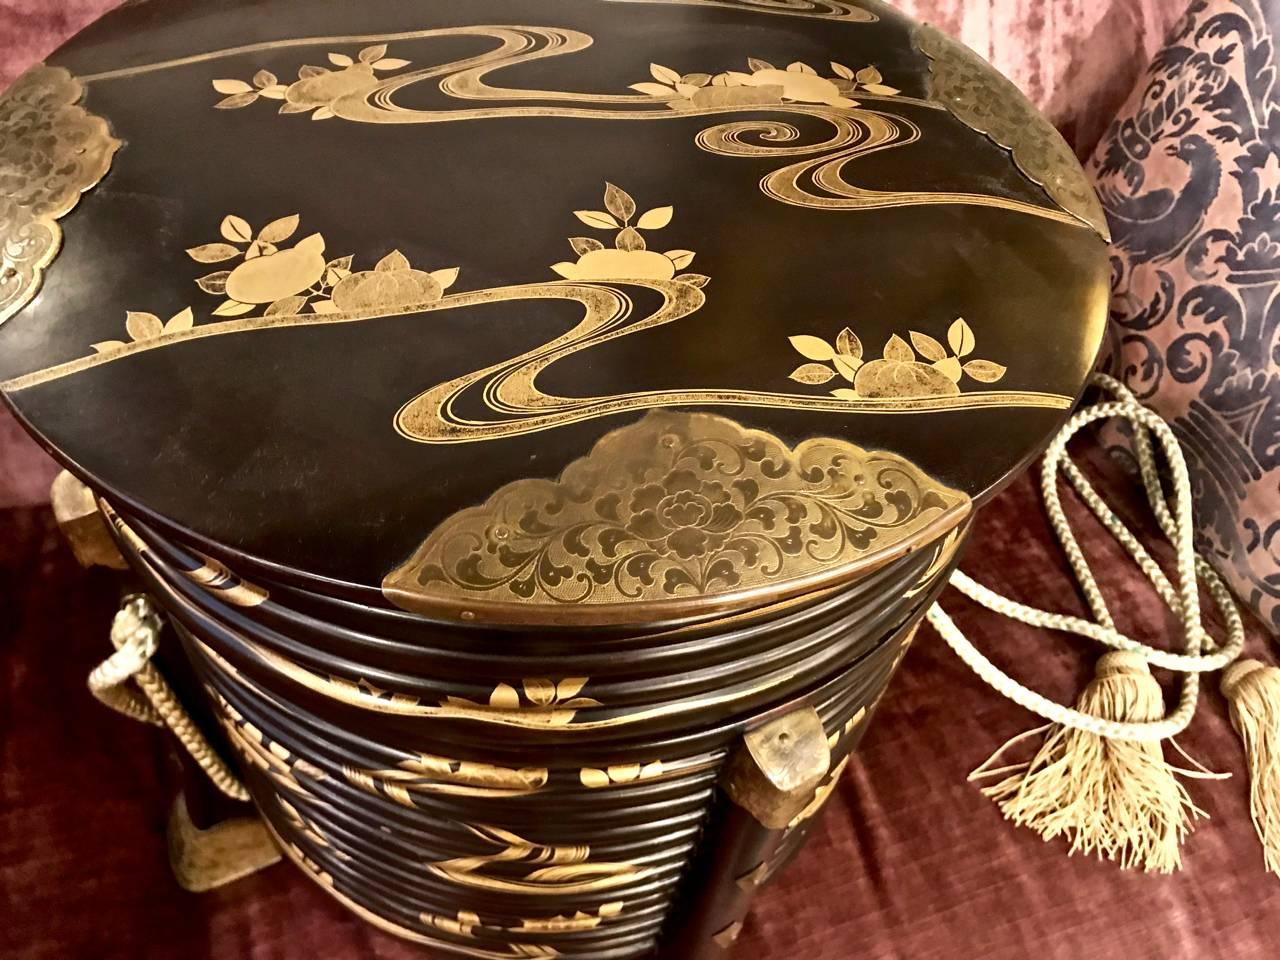 Beautiful Japanese Meiji period black lacquer and gilt lacquer hatbox. The hatbox is in overall very good to excellent condition with the box retaining its original chased brass detailing and tasseled silk cords.